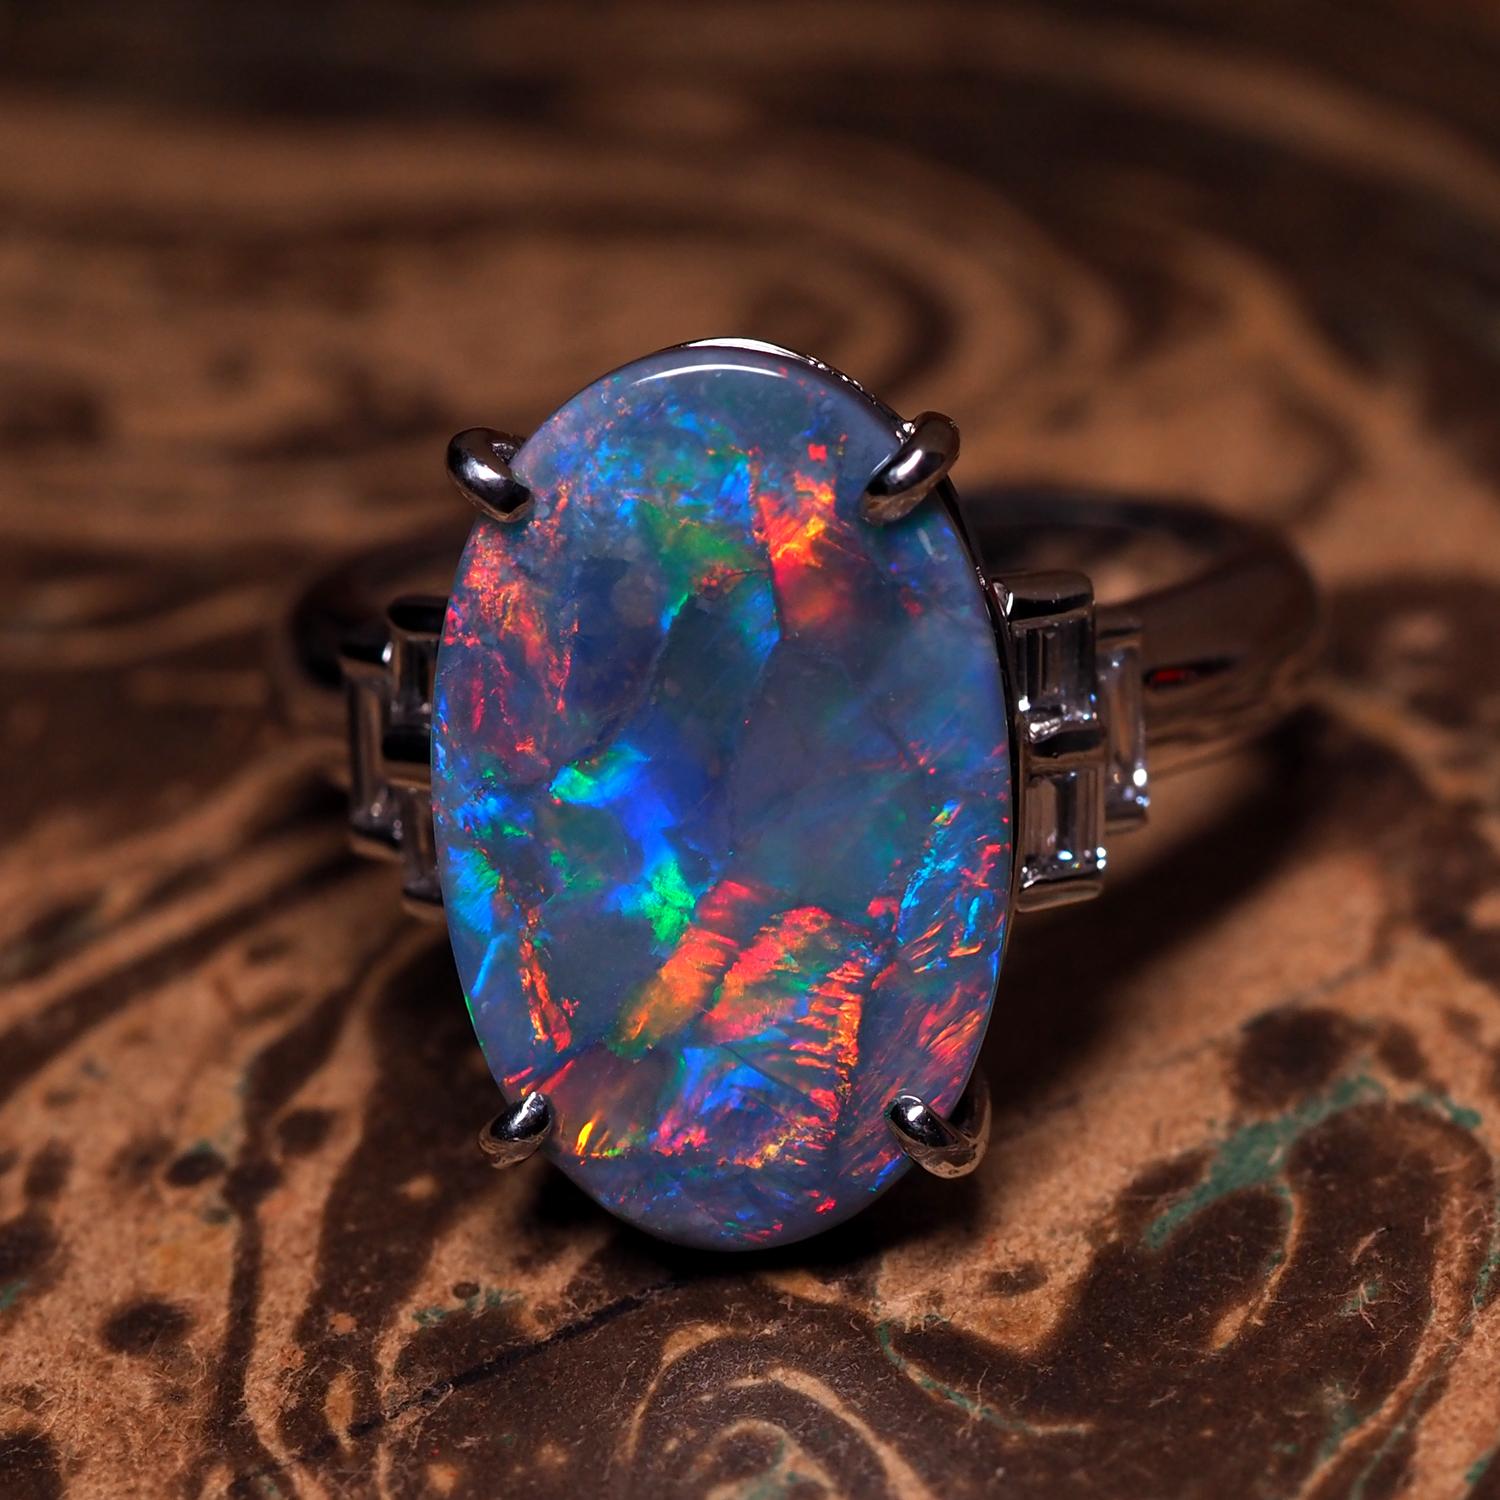 Rare Custom Made Platinum Black Opal & Diamond Ring
Allow this stunning brightly polished platinum black opal and diamond ring to capture your attention, custom made with keen attention to detail. Baguette cut diamonds are placed on each side of the